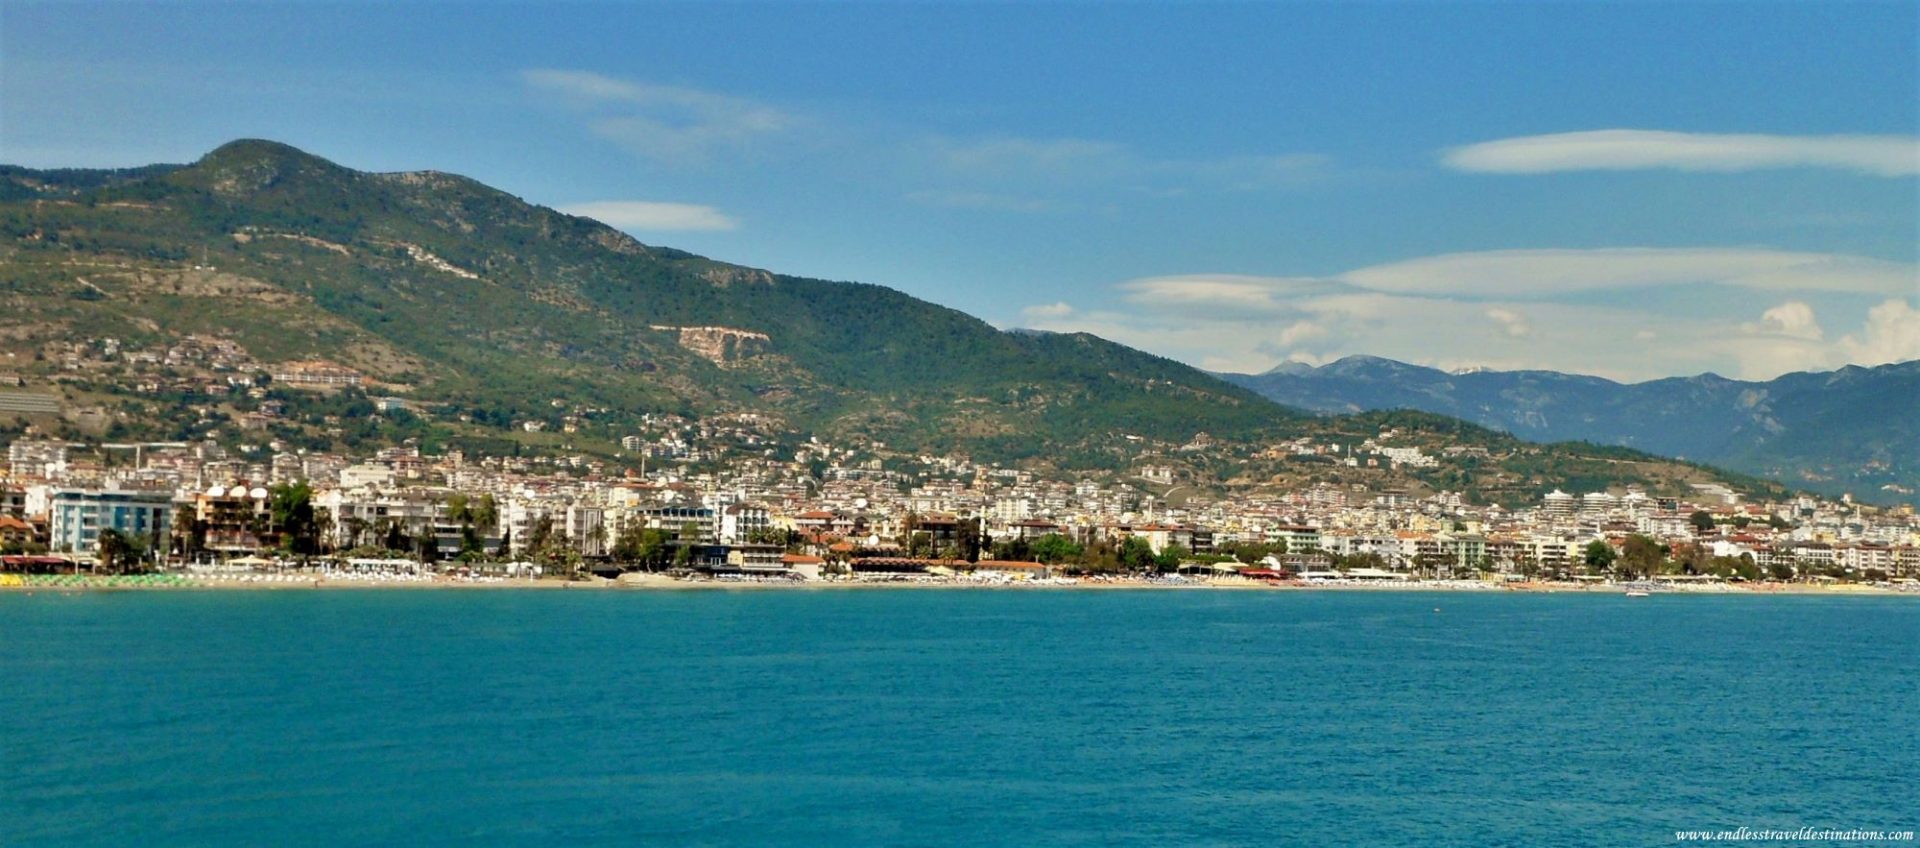 8 Best Places for Shopping in Alanya - Endless Travel Destinations